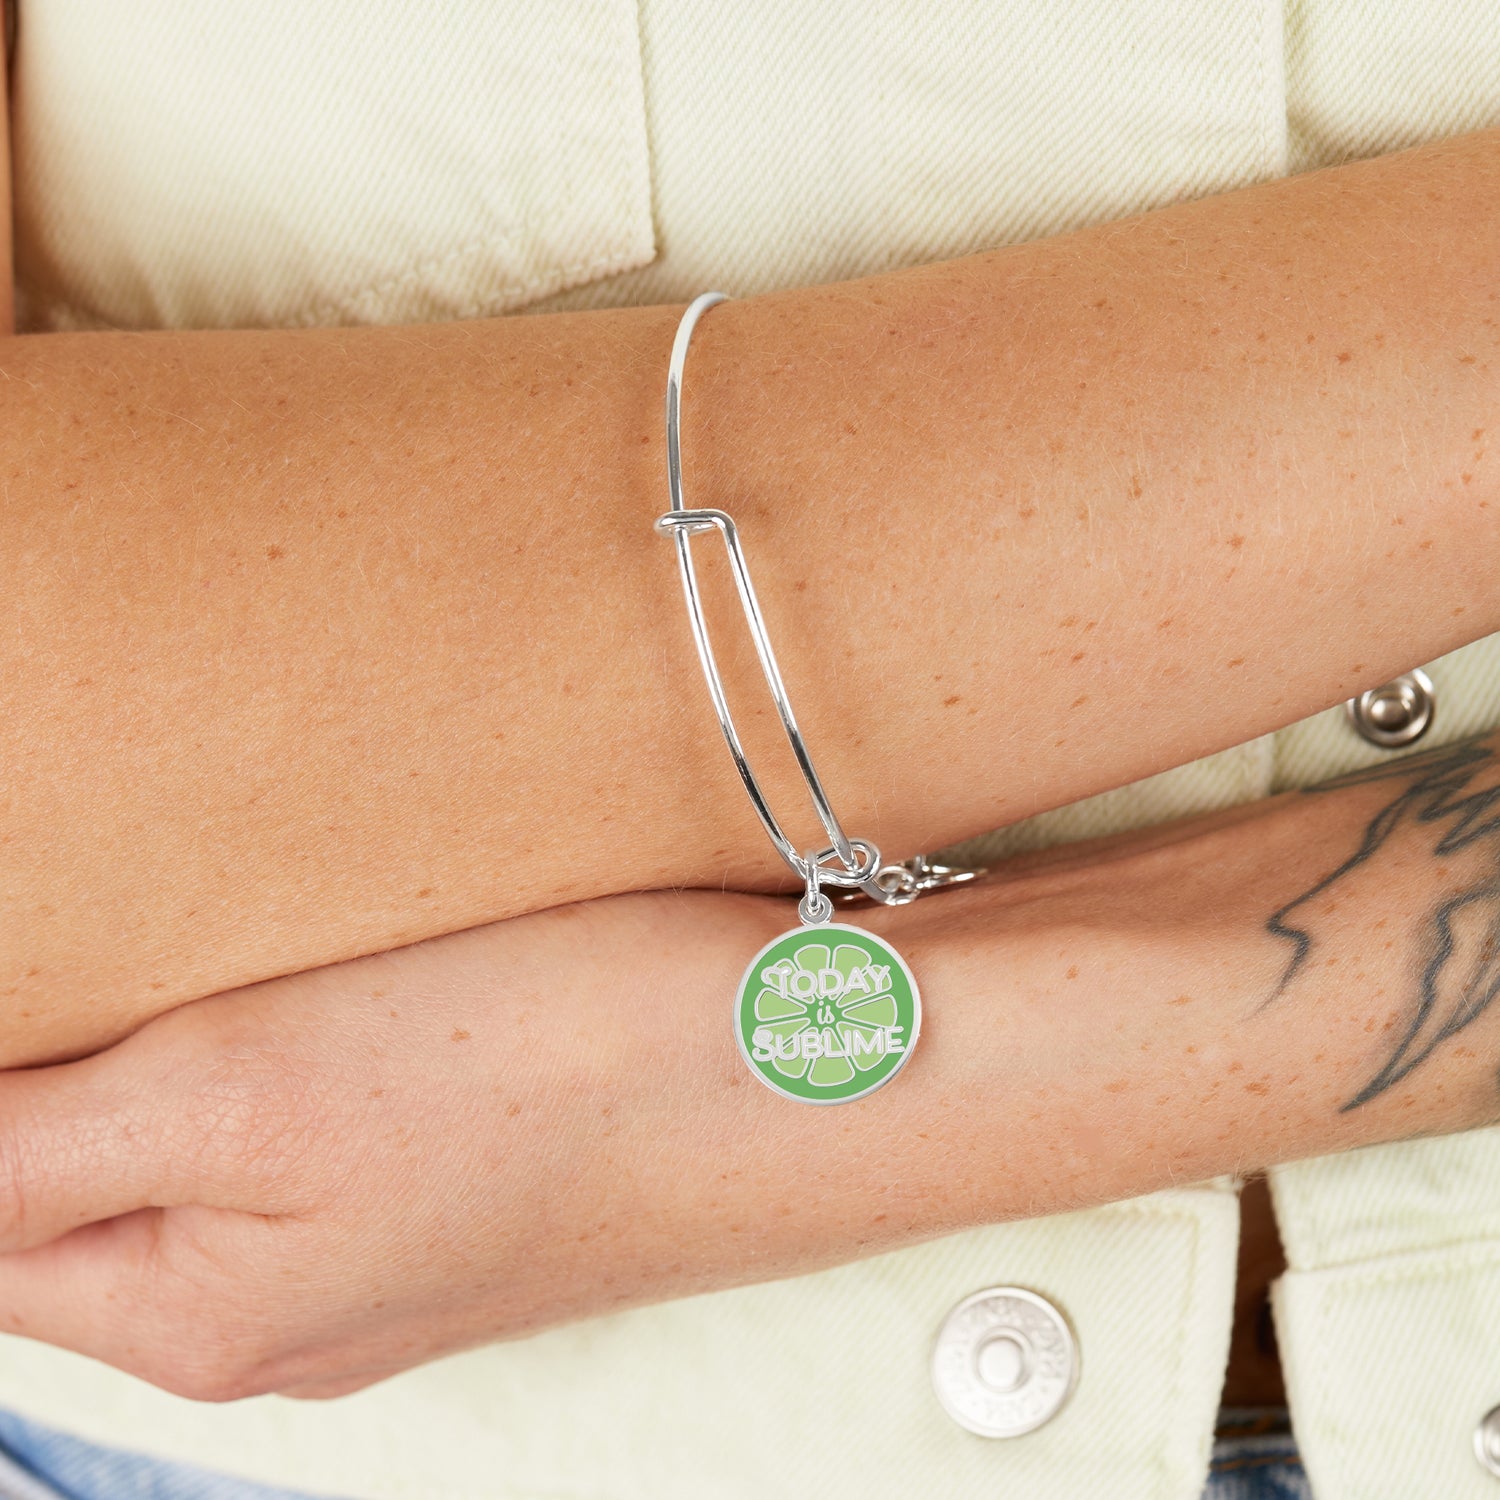 'Today is Sublime' Charm Bangle